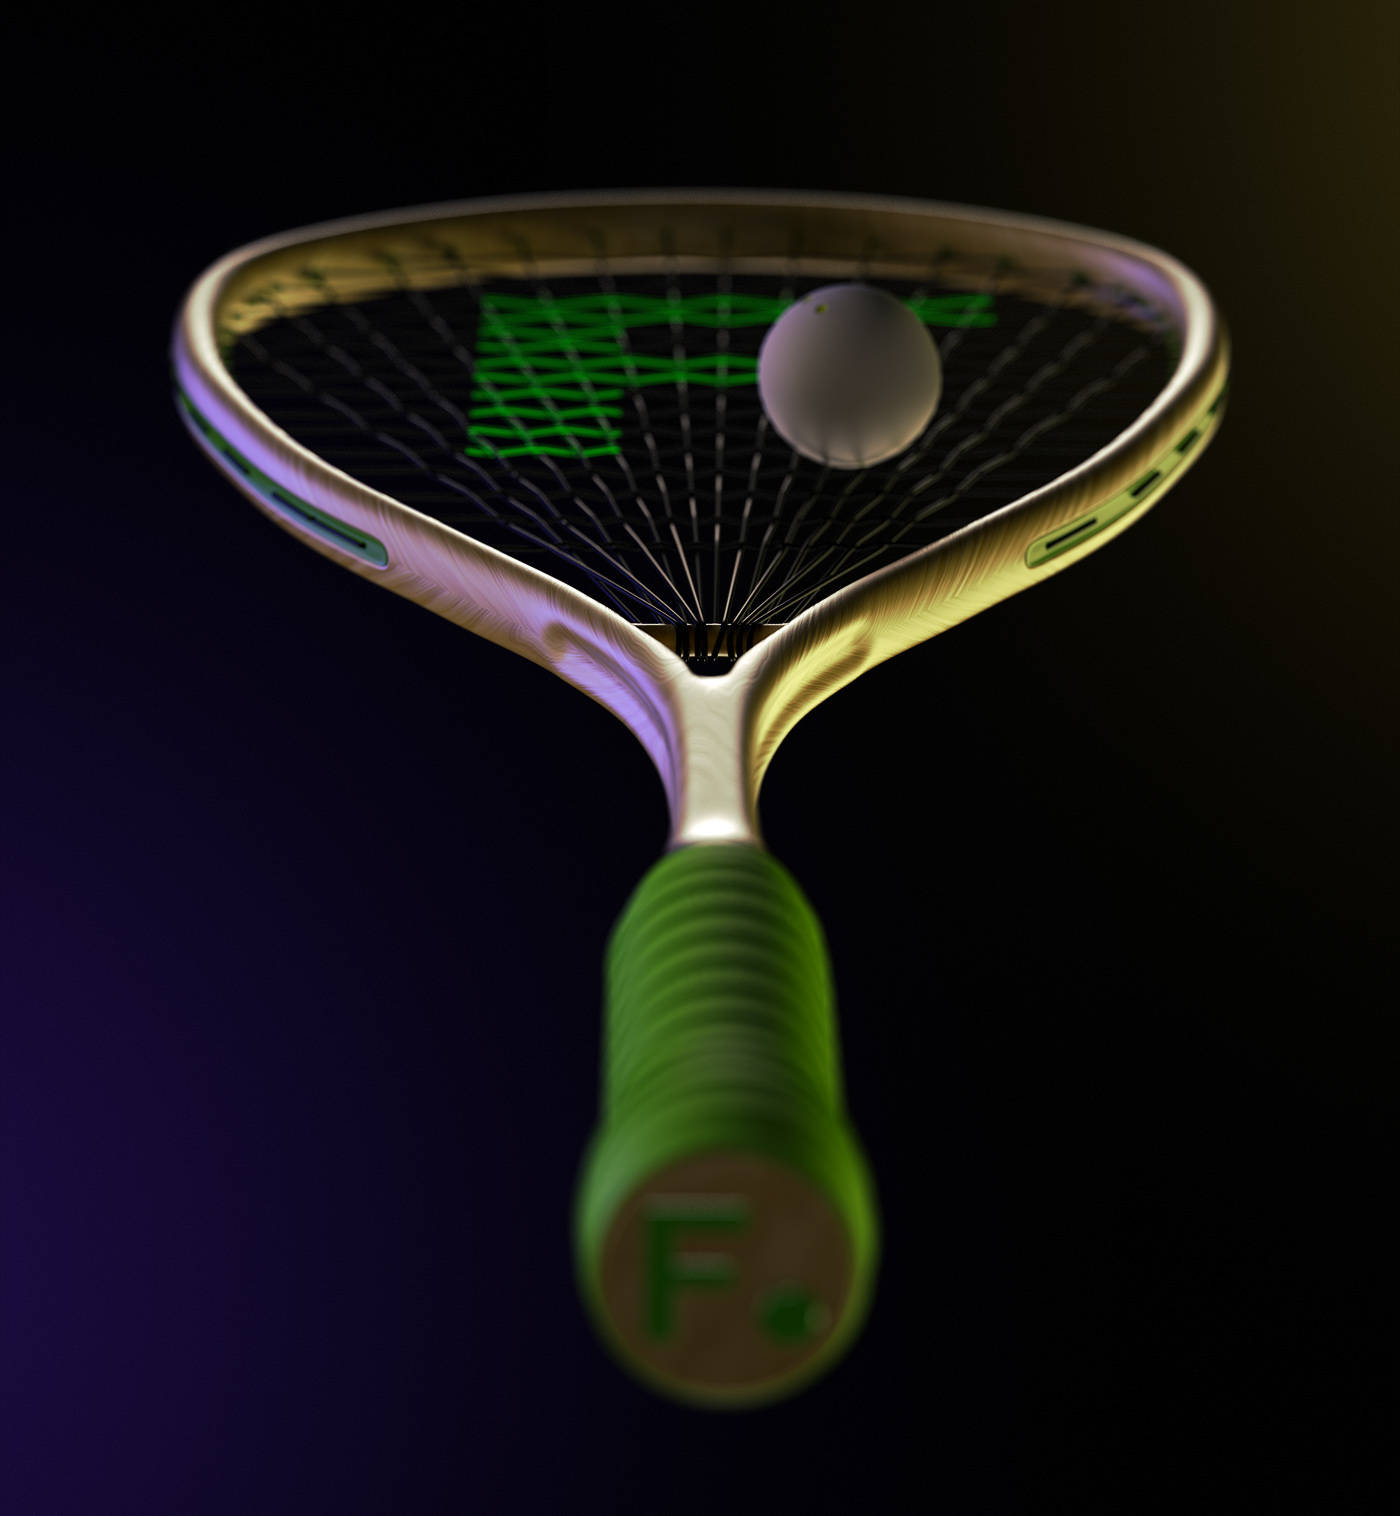 Intensity Unleashed - A 3D Rendered Squash Racket Wallpaper